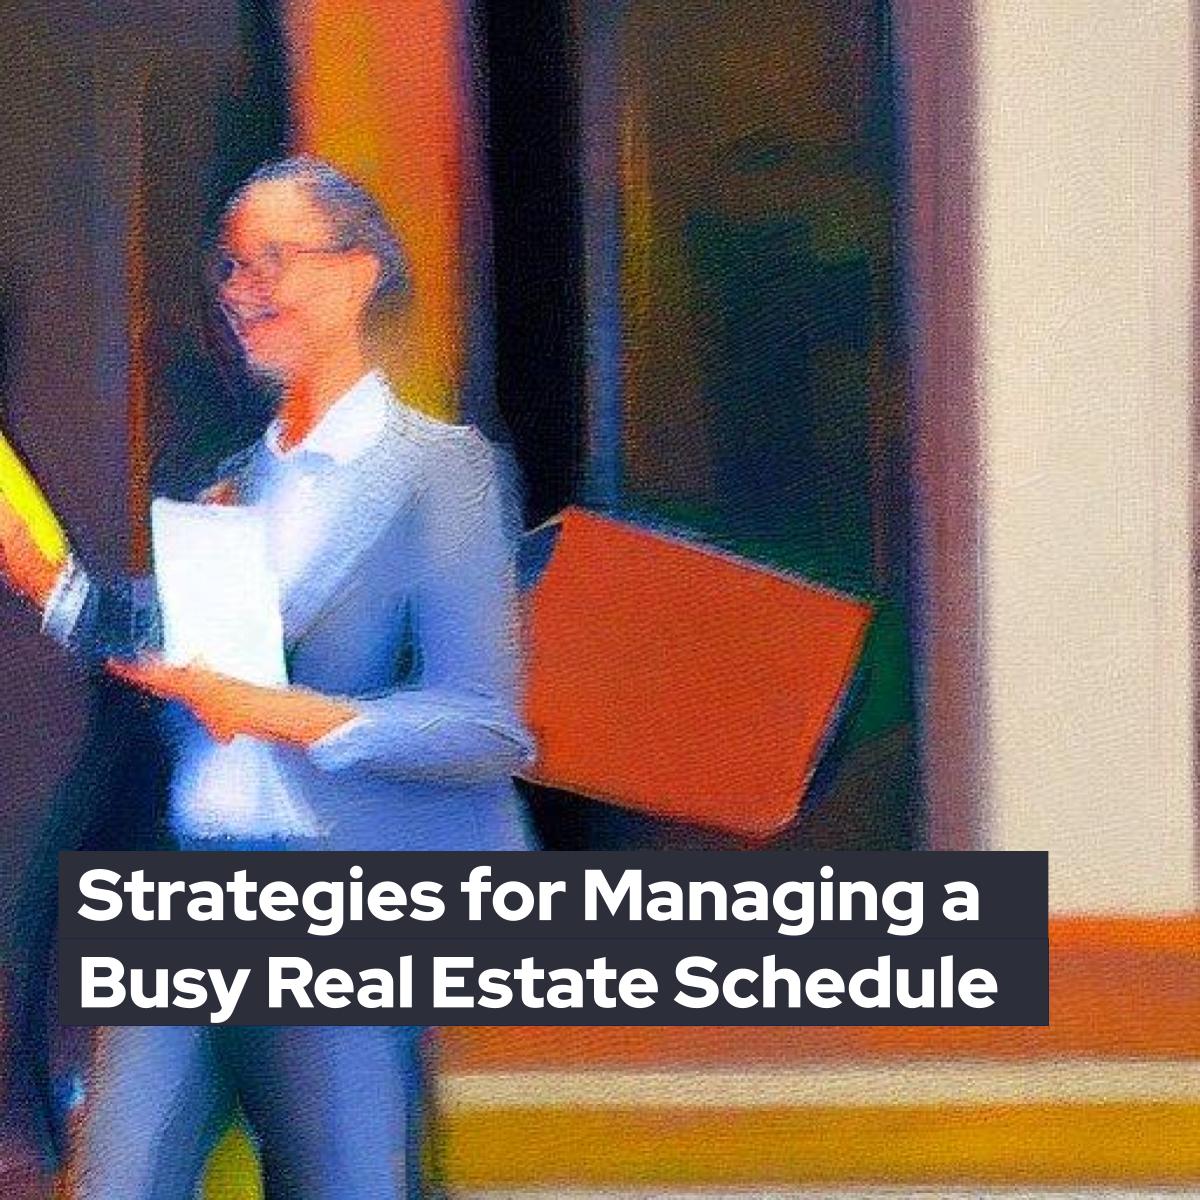 Strategies for Managing a Busy Real Estate Schedule